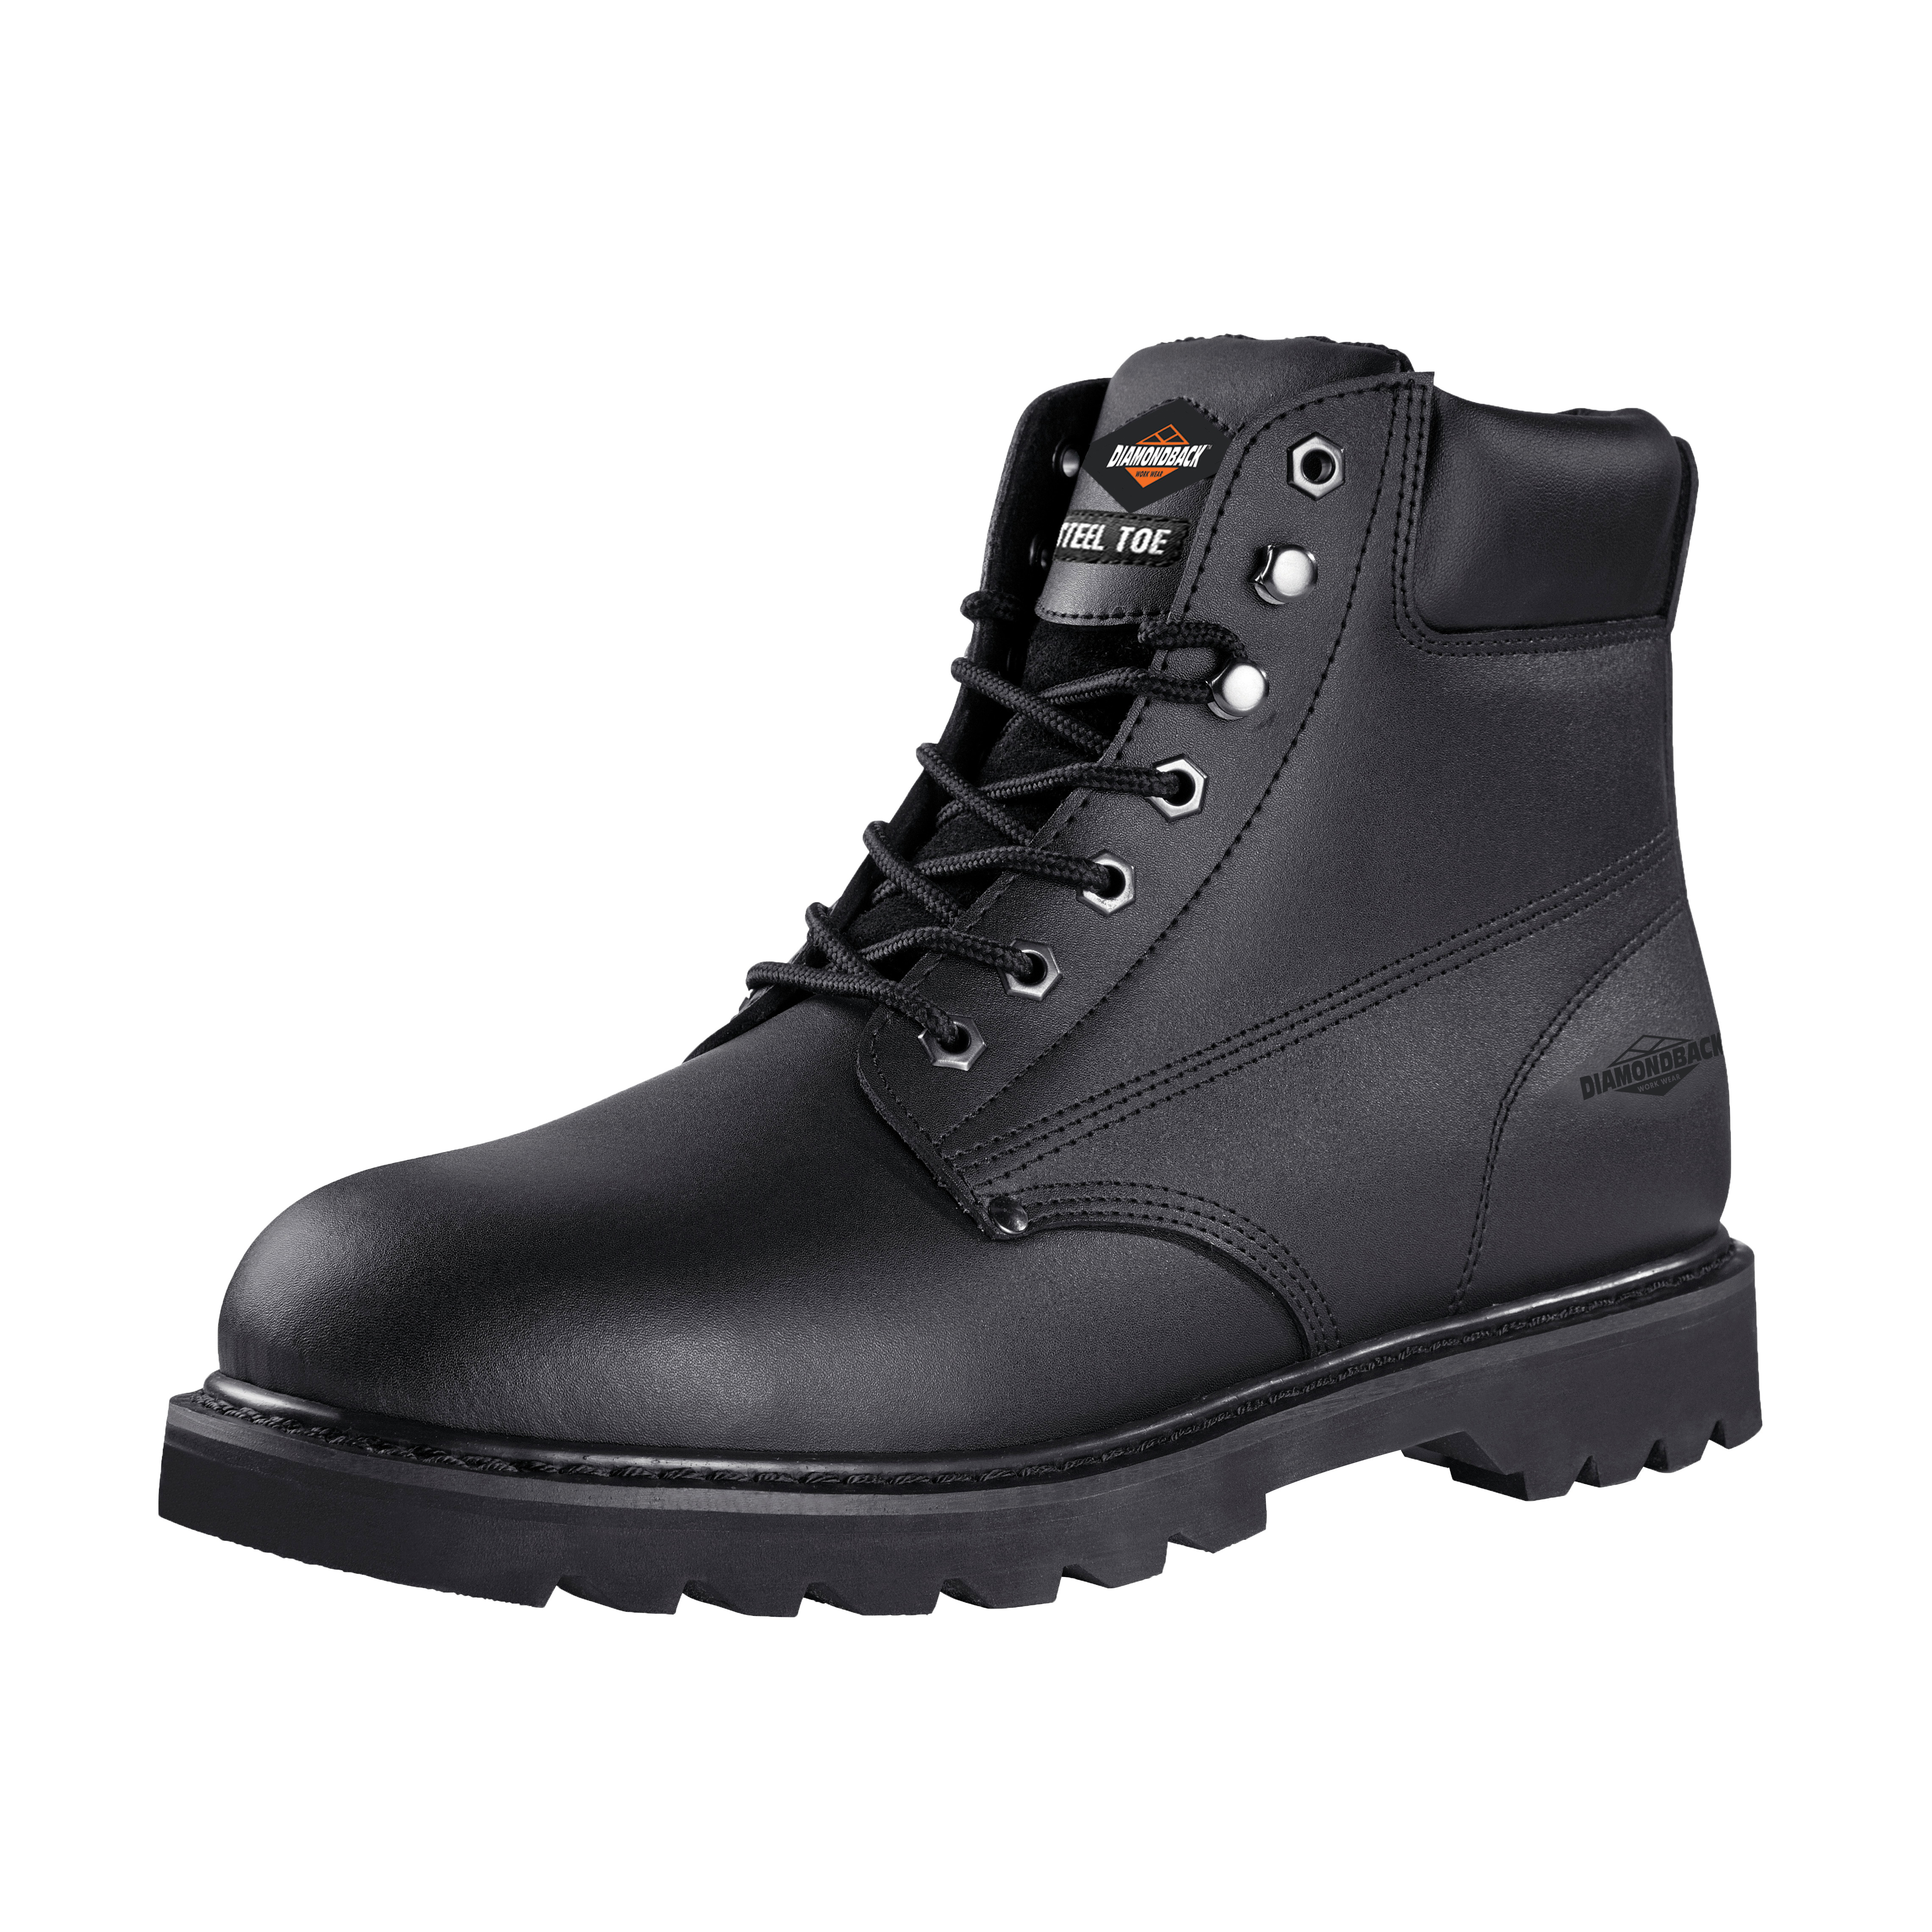 655SS-9.5 Work Boots, 9.5, Medium Shoe Last W, Black, Leather Upper, Lace-Up Boots Closure, With Lining